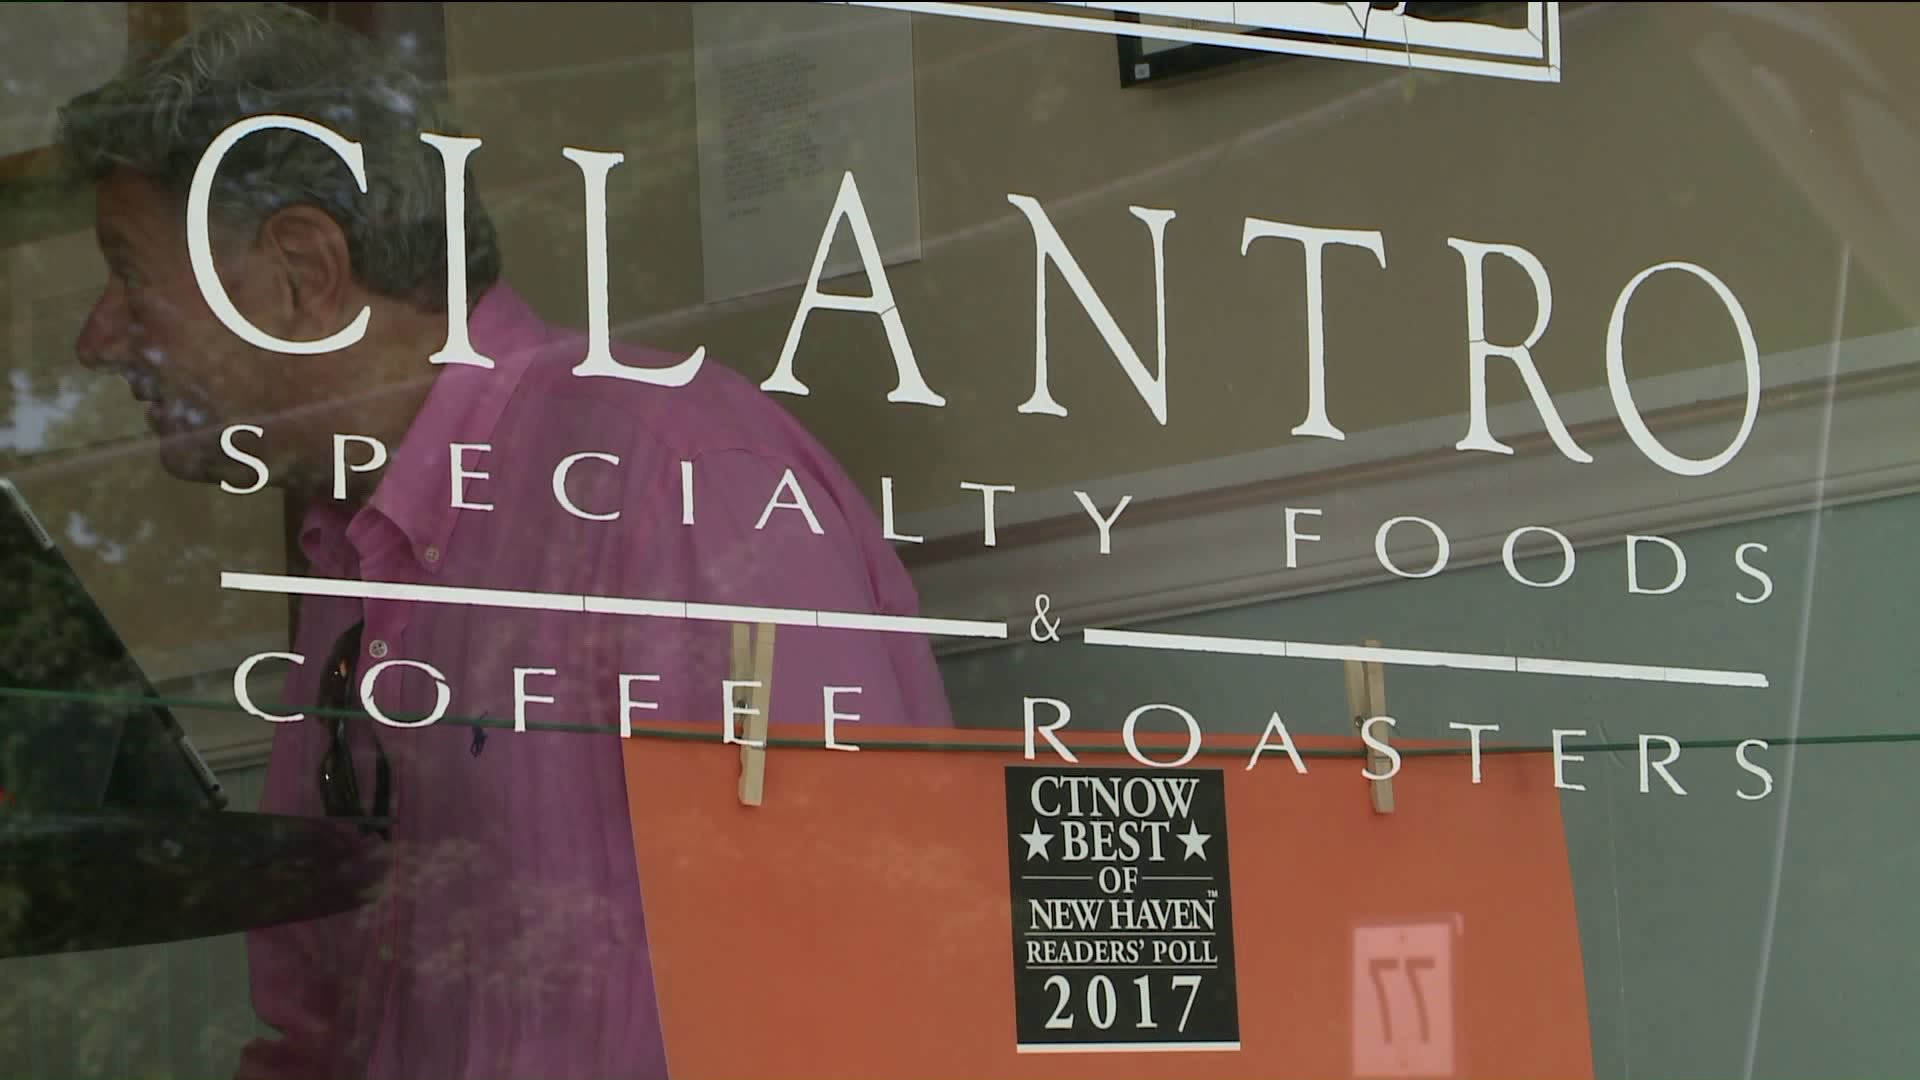 Cilantro`s Speciality Foods and Coffee Roasters in Guilford ahead of its time